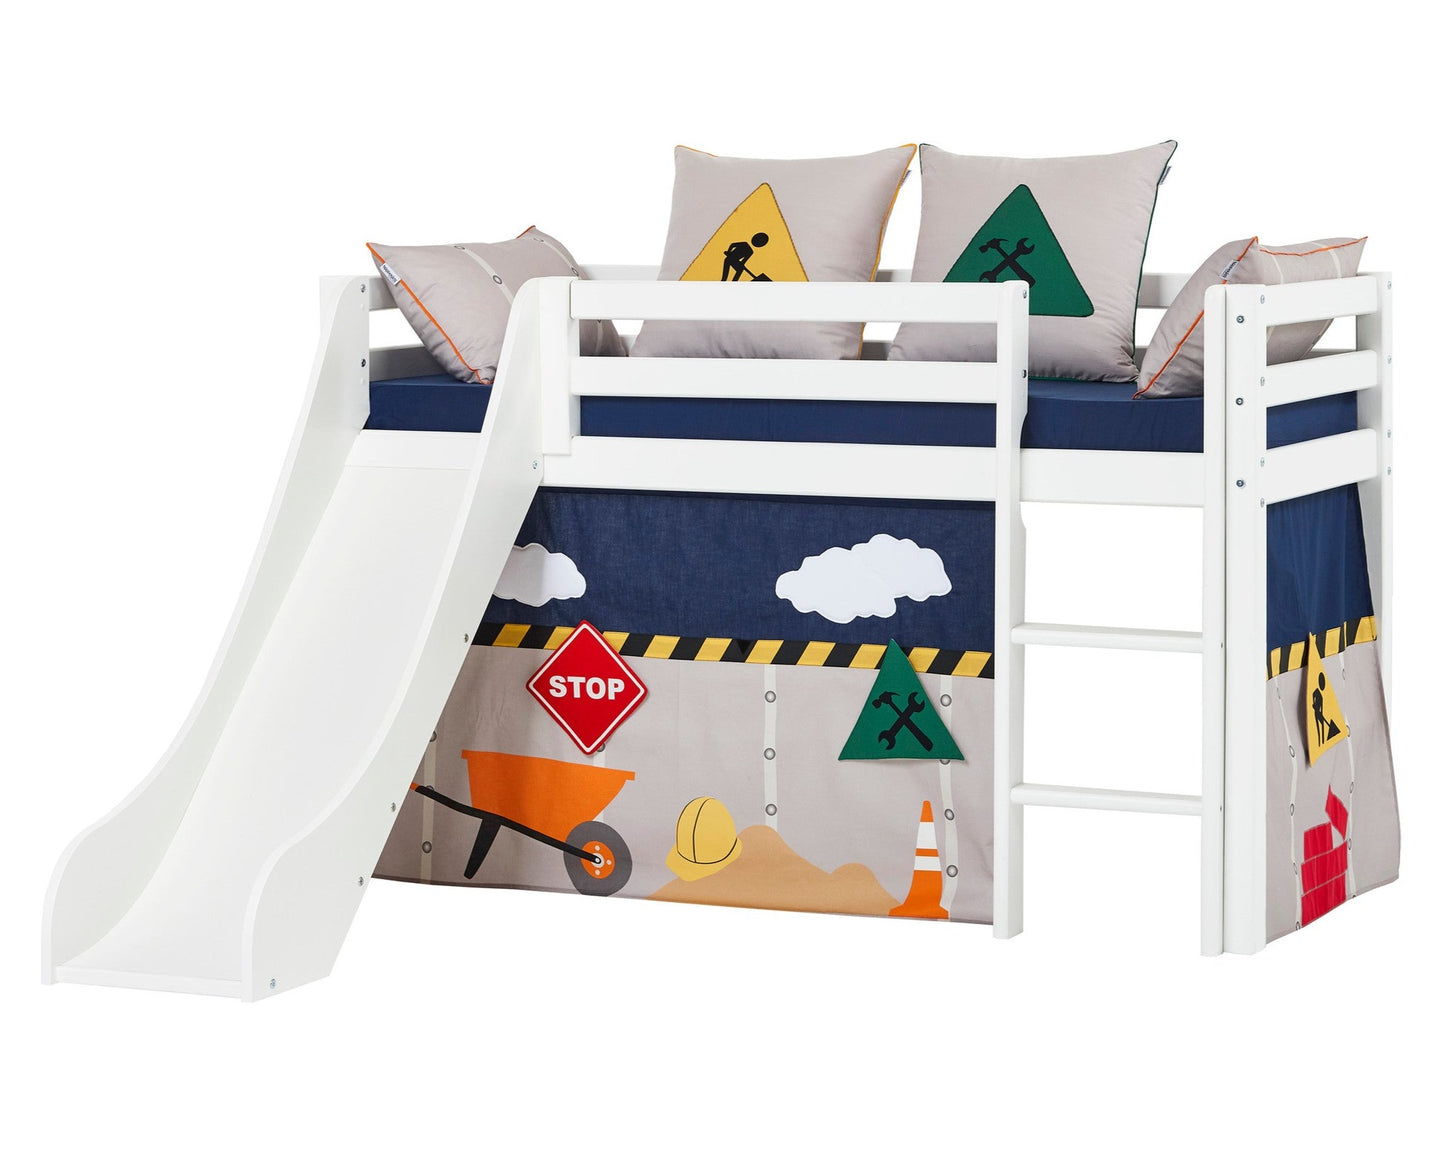 Construction - Curtain for half-high and bunk bed - 70x160 cm